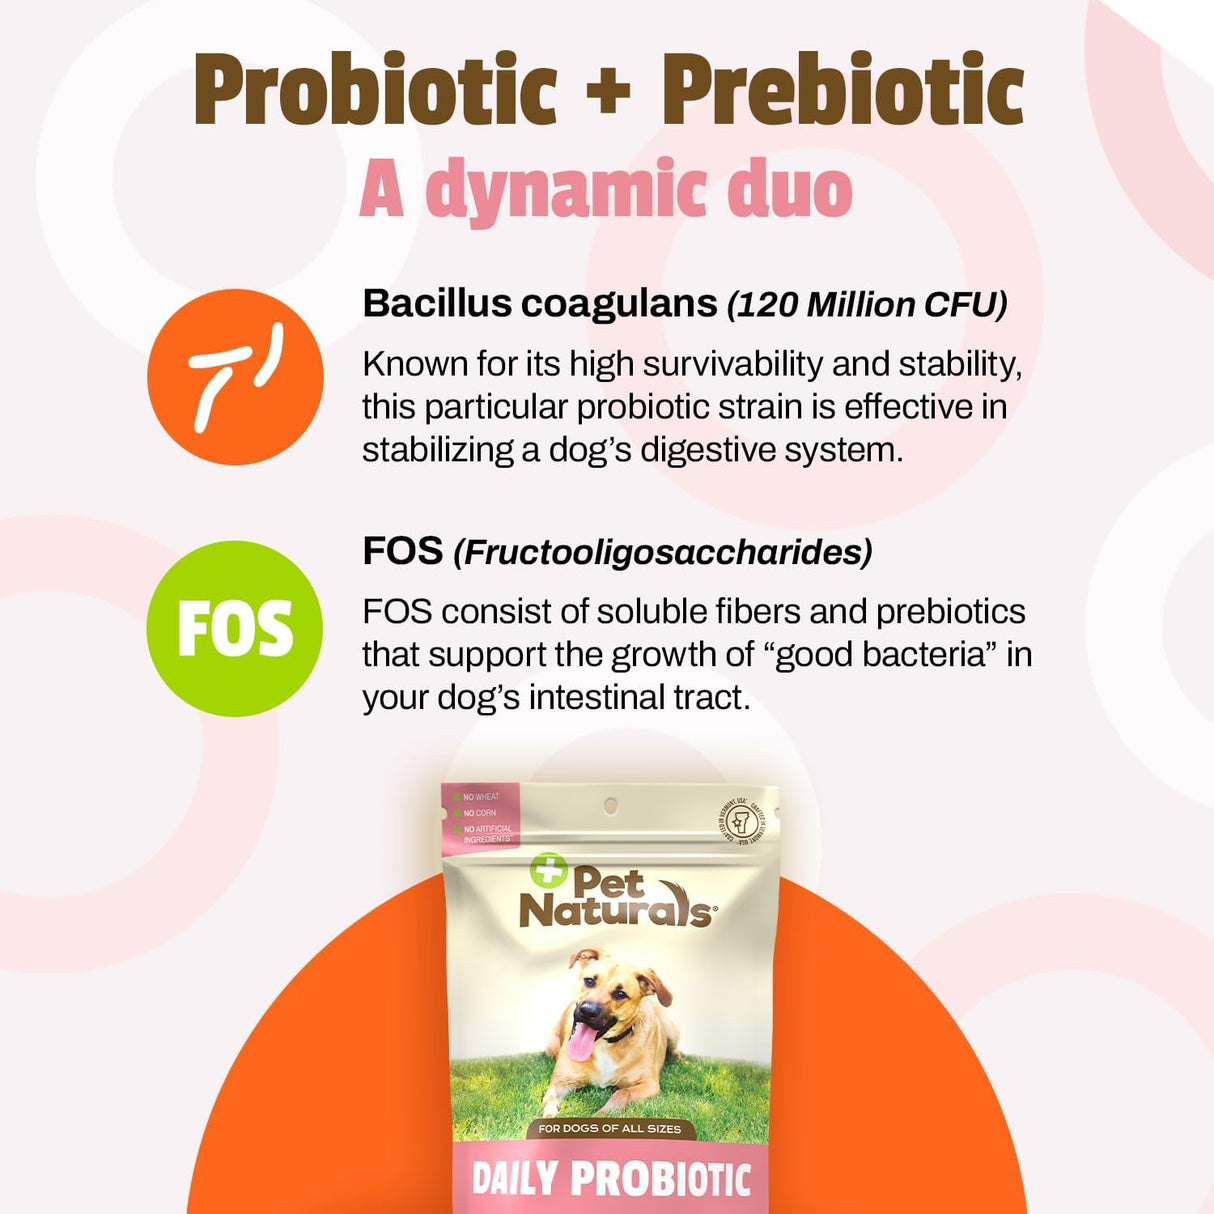 Pet Naturals Daily Probiotic for Dogs 160 Masticables